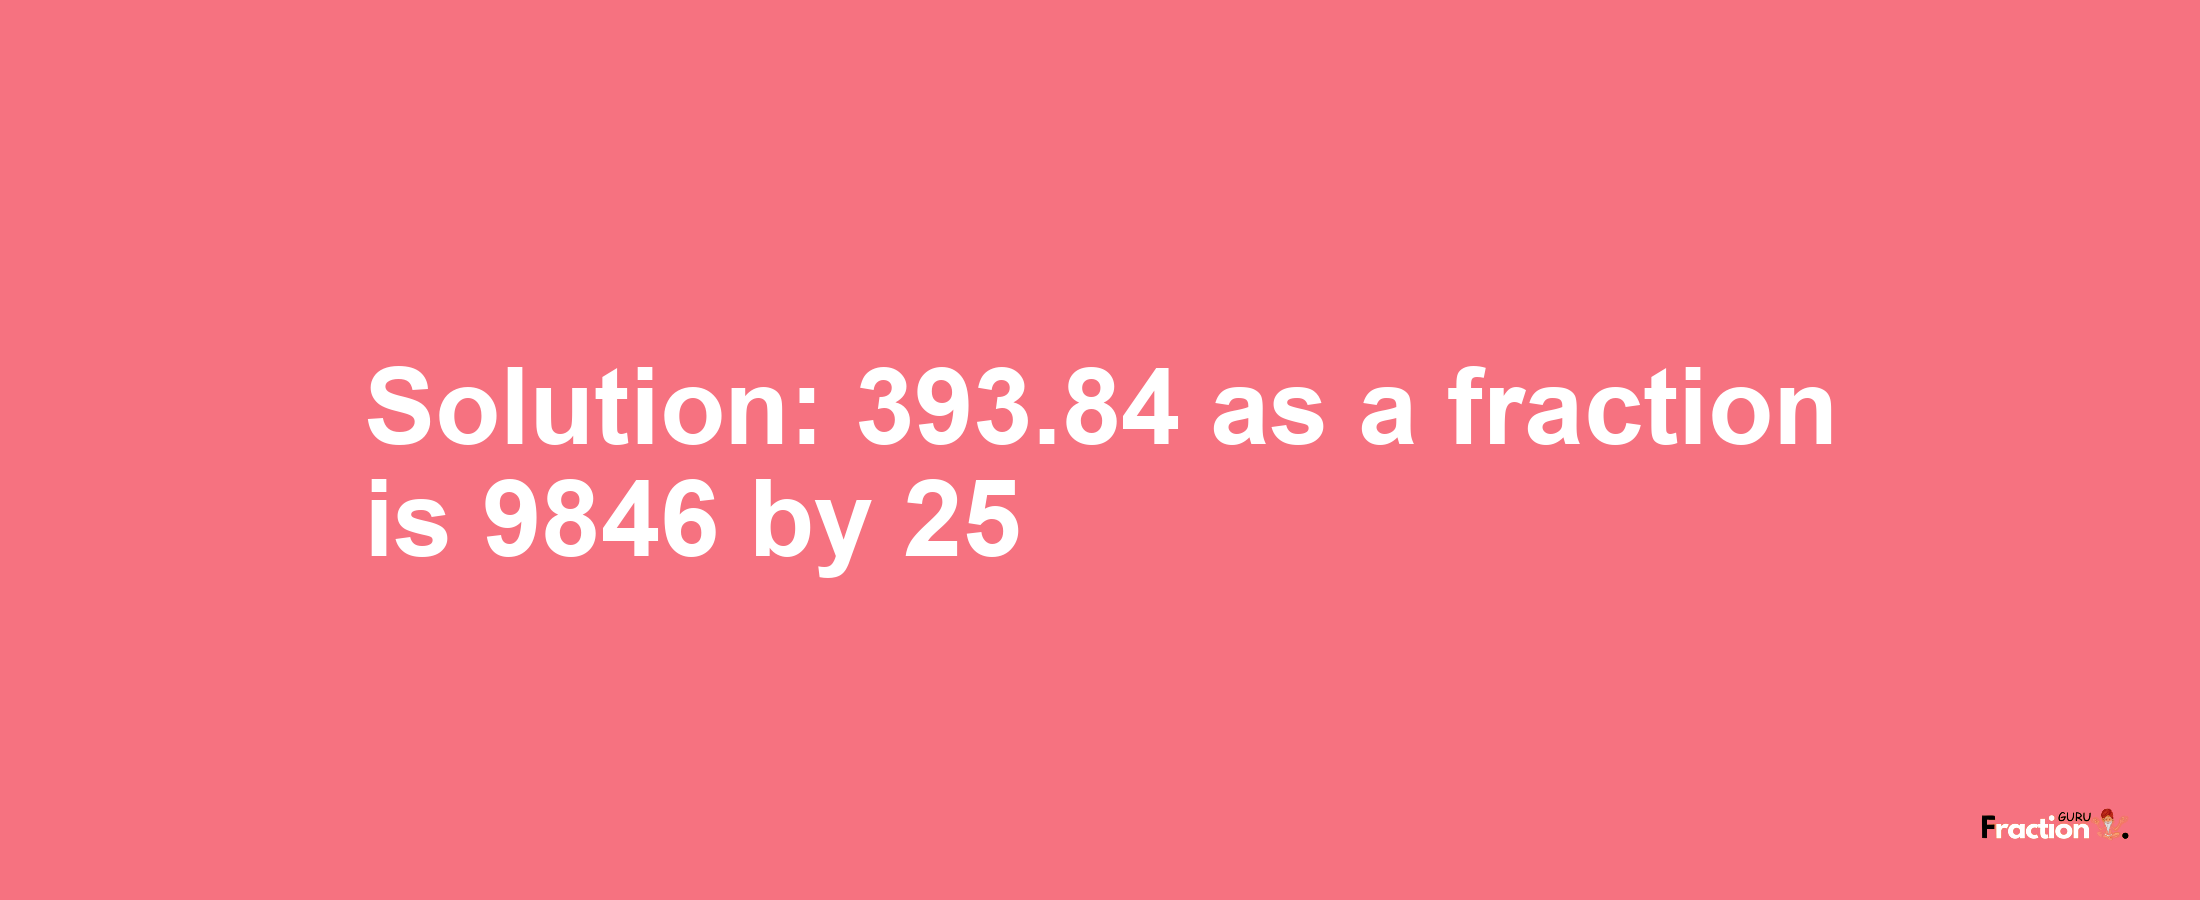 Solution:393.84 as a fraction is 9846/25